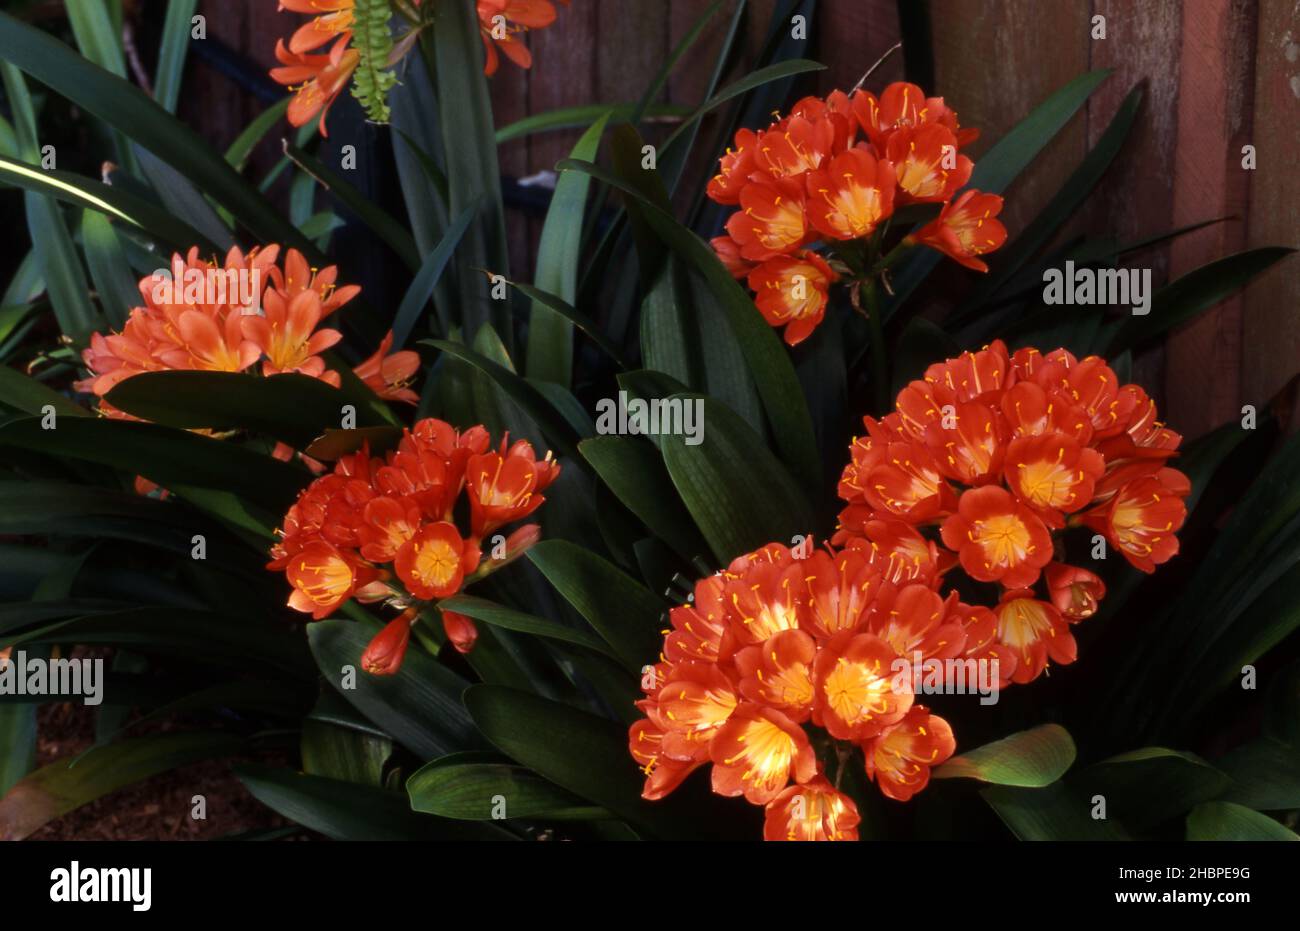 ORANGE CLIVIA FLOWERS, COMMONLY KNOWN AS KAFFIR LILY, NATAL LILY OR BUSH LILY. Stock Photo